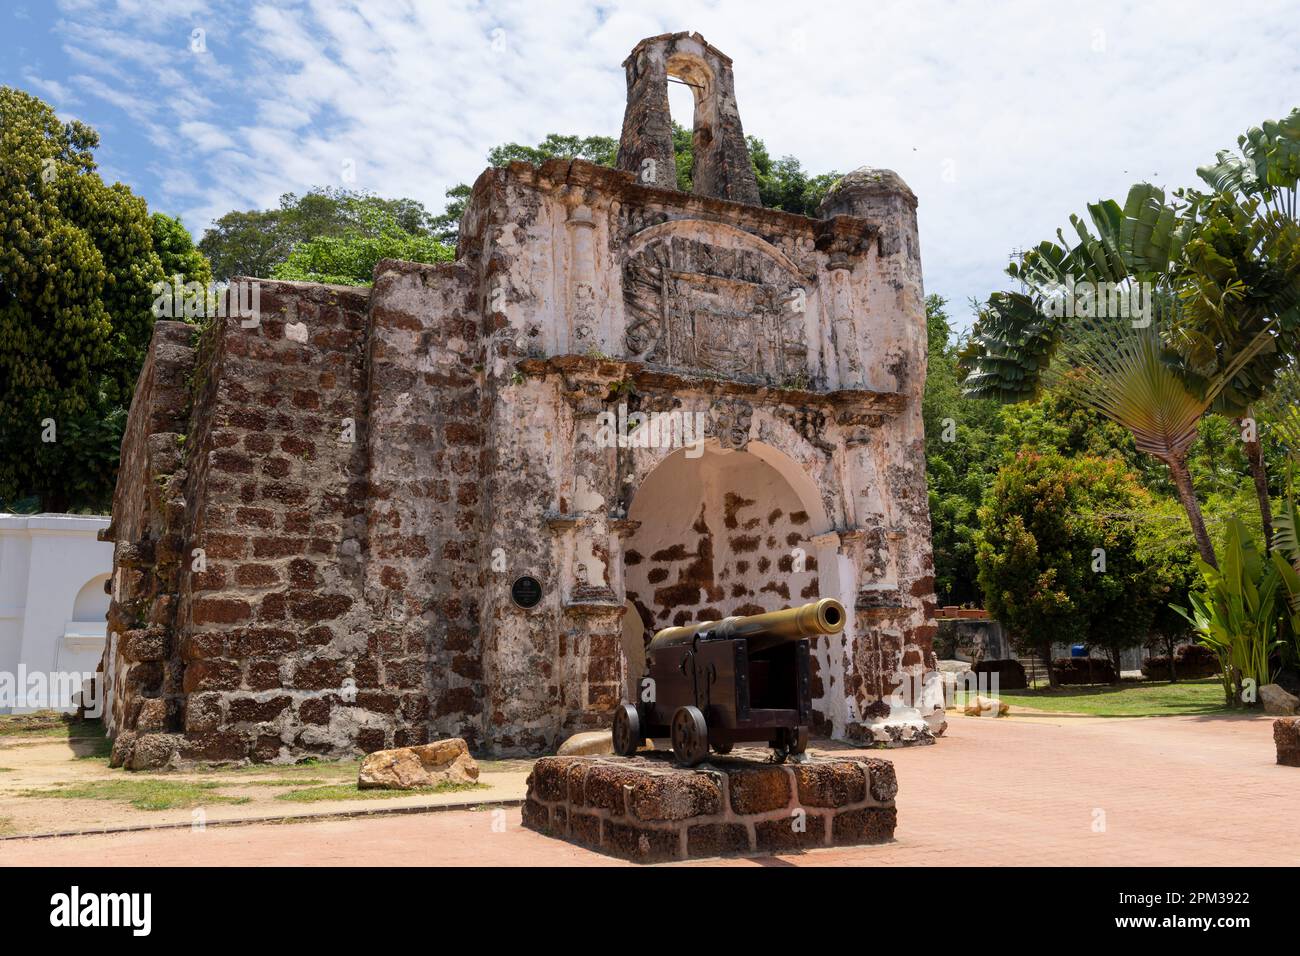 Surviving gate of the A Famosa Portuguese fort in Malacca, Malaysia Stock Photo